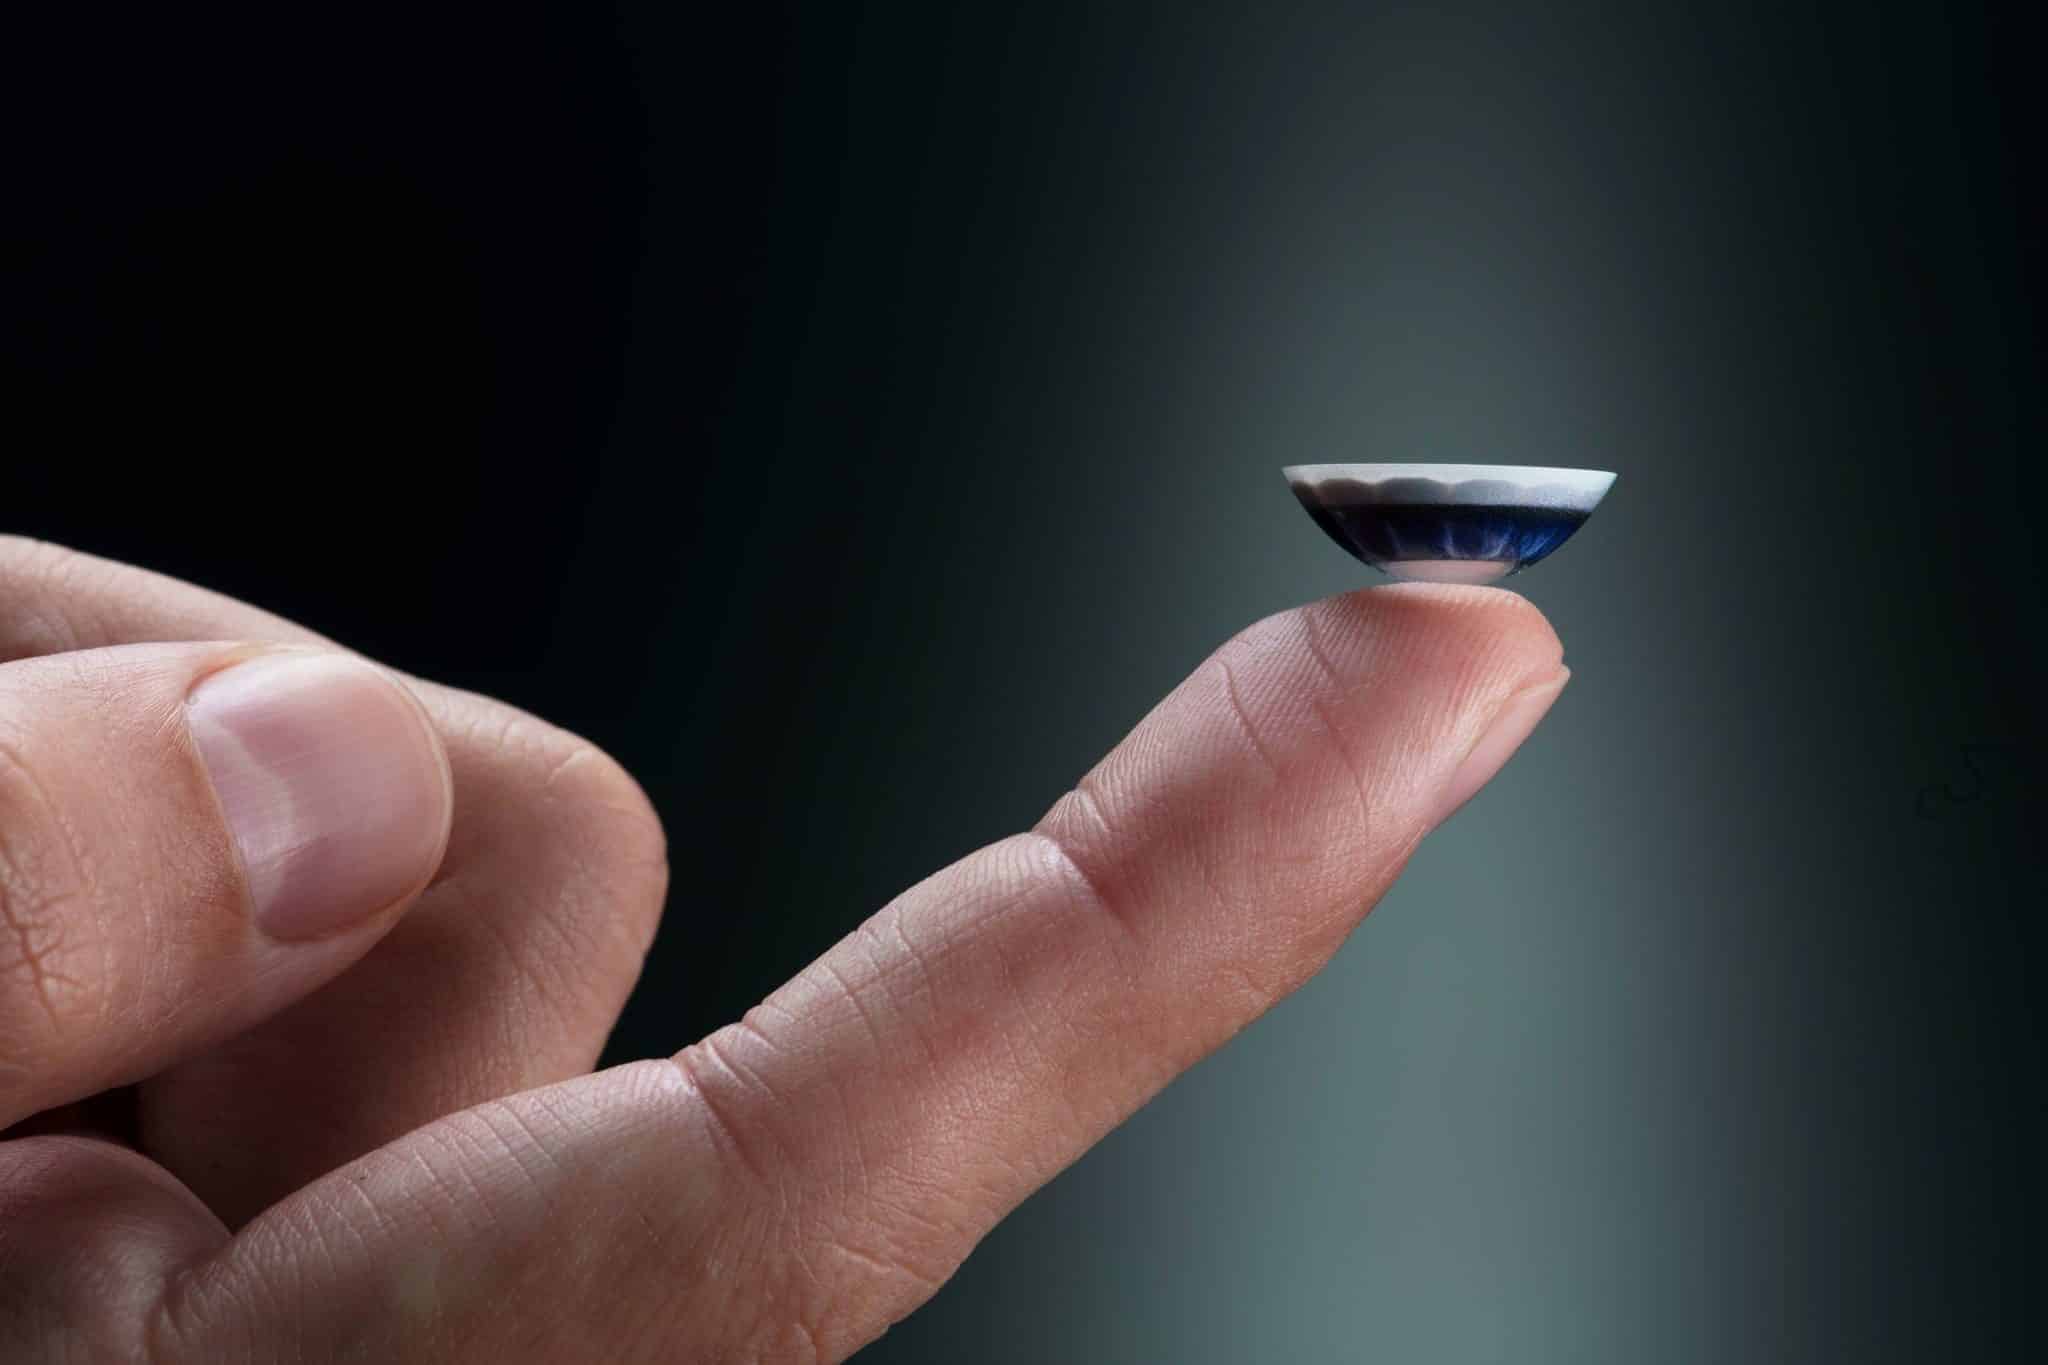 Mojo Vision AR Contact Lenses are a major development in Augmented Reality